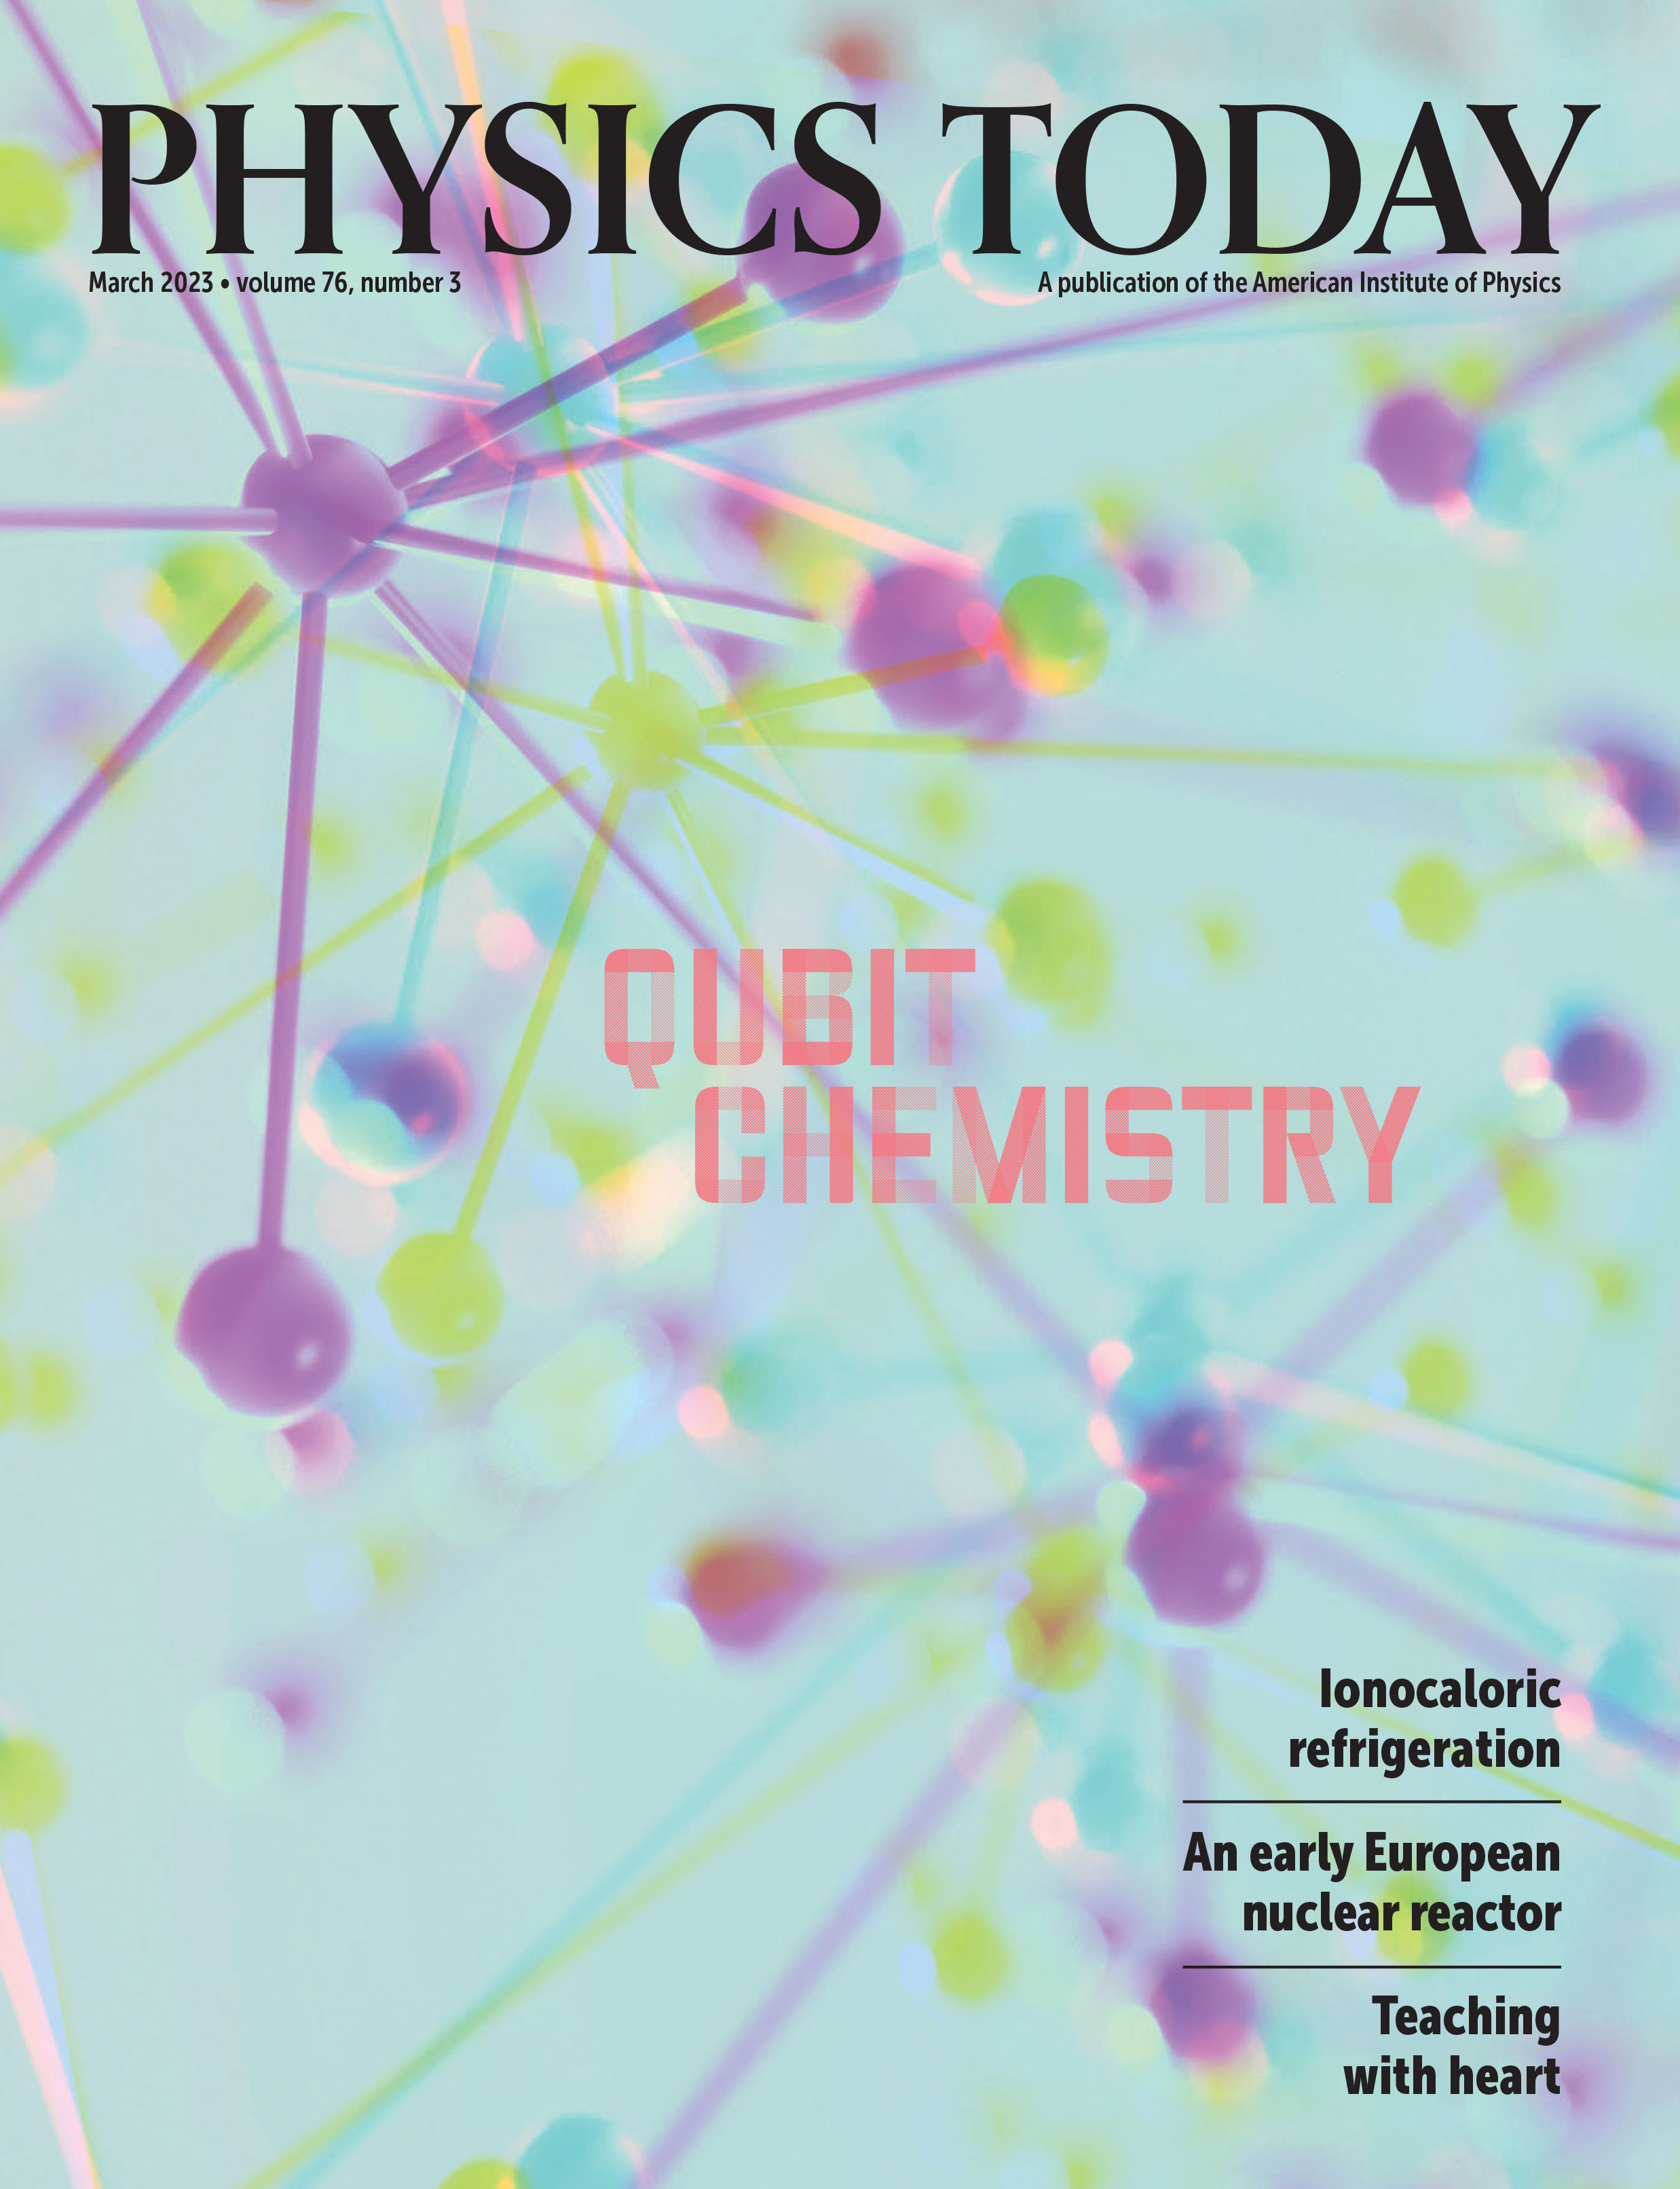 March 2023 Physics Today cover